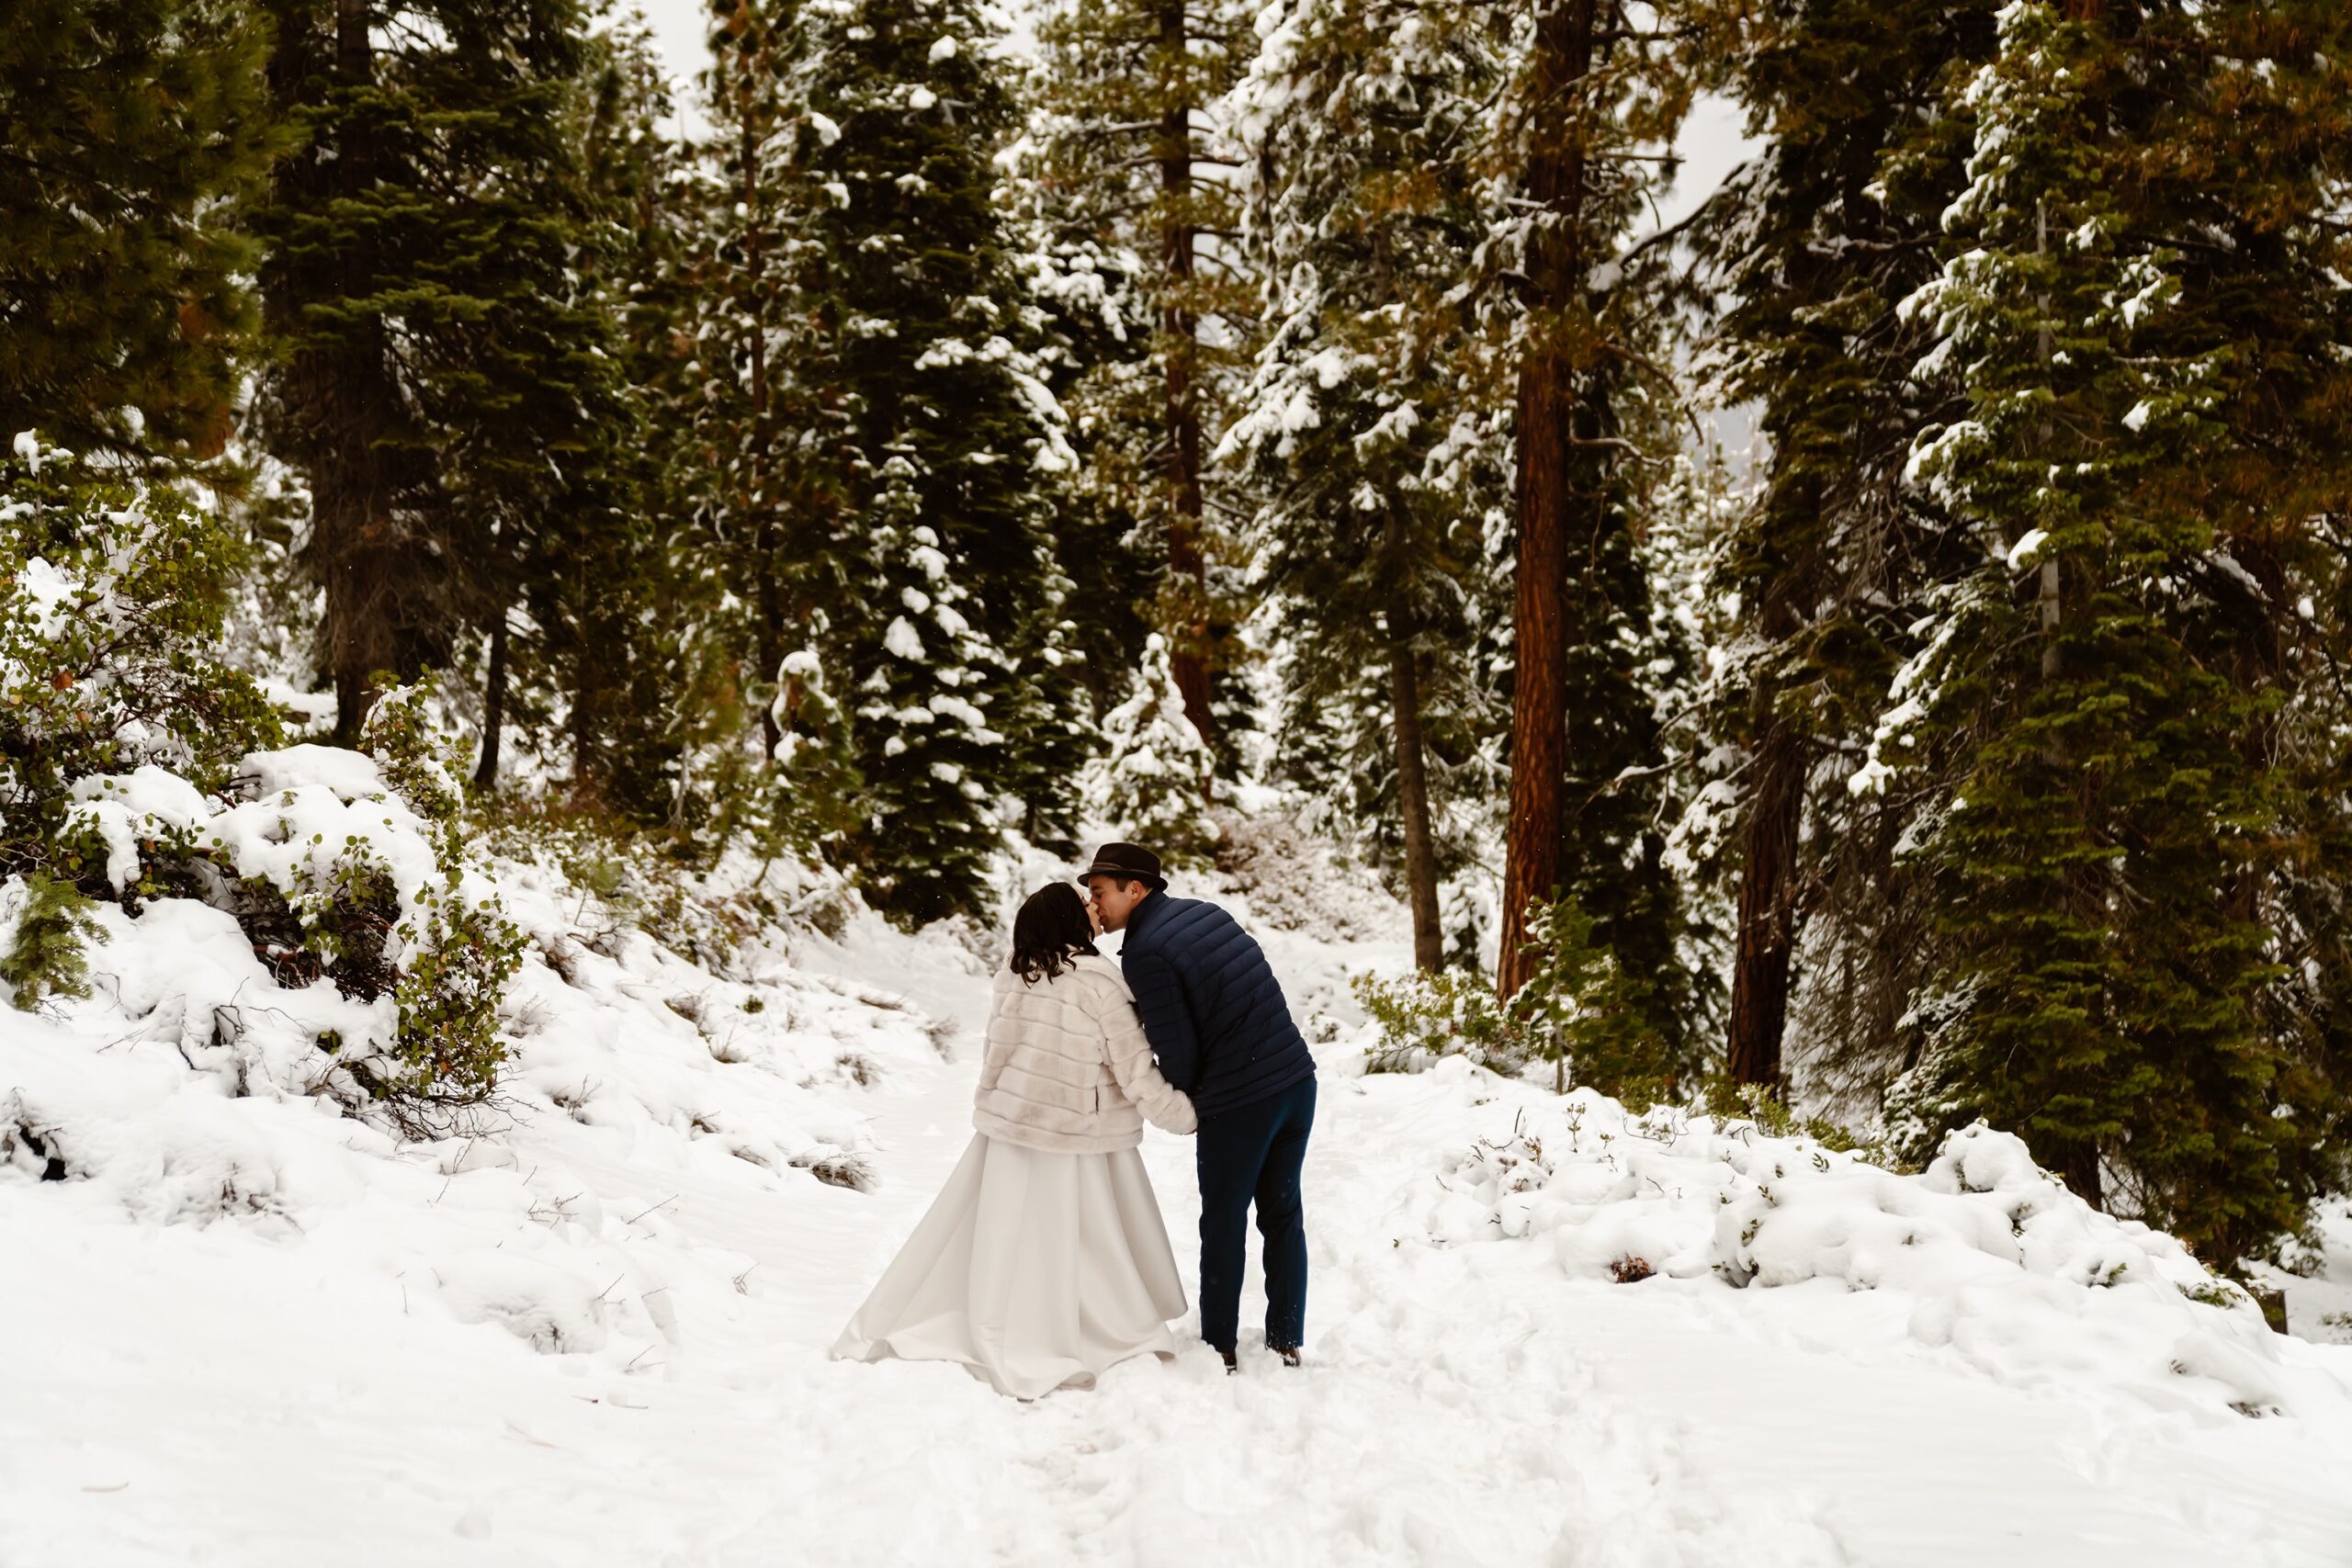 Bride and groom kiss in the snowy mountains